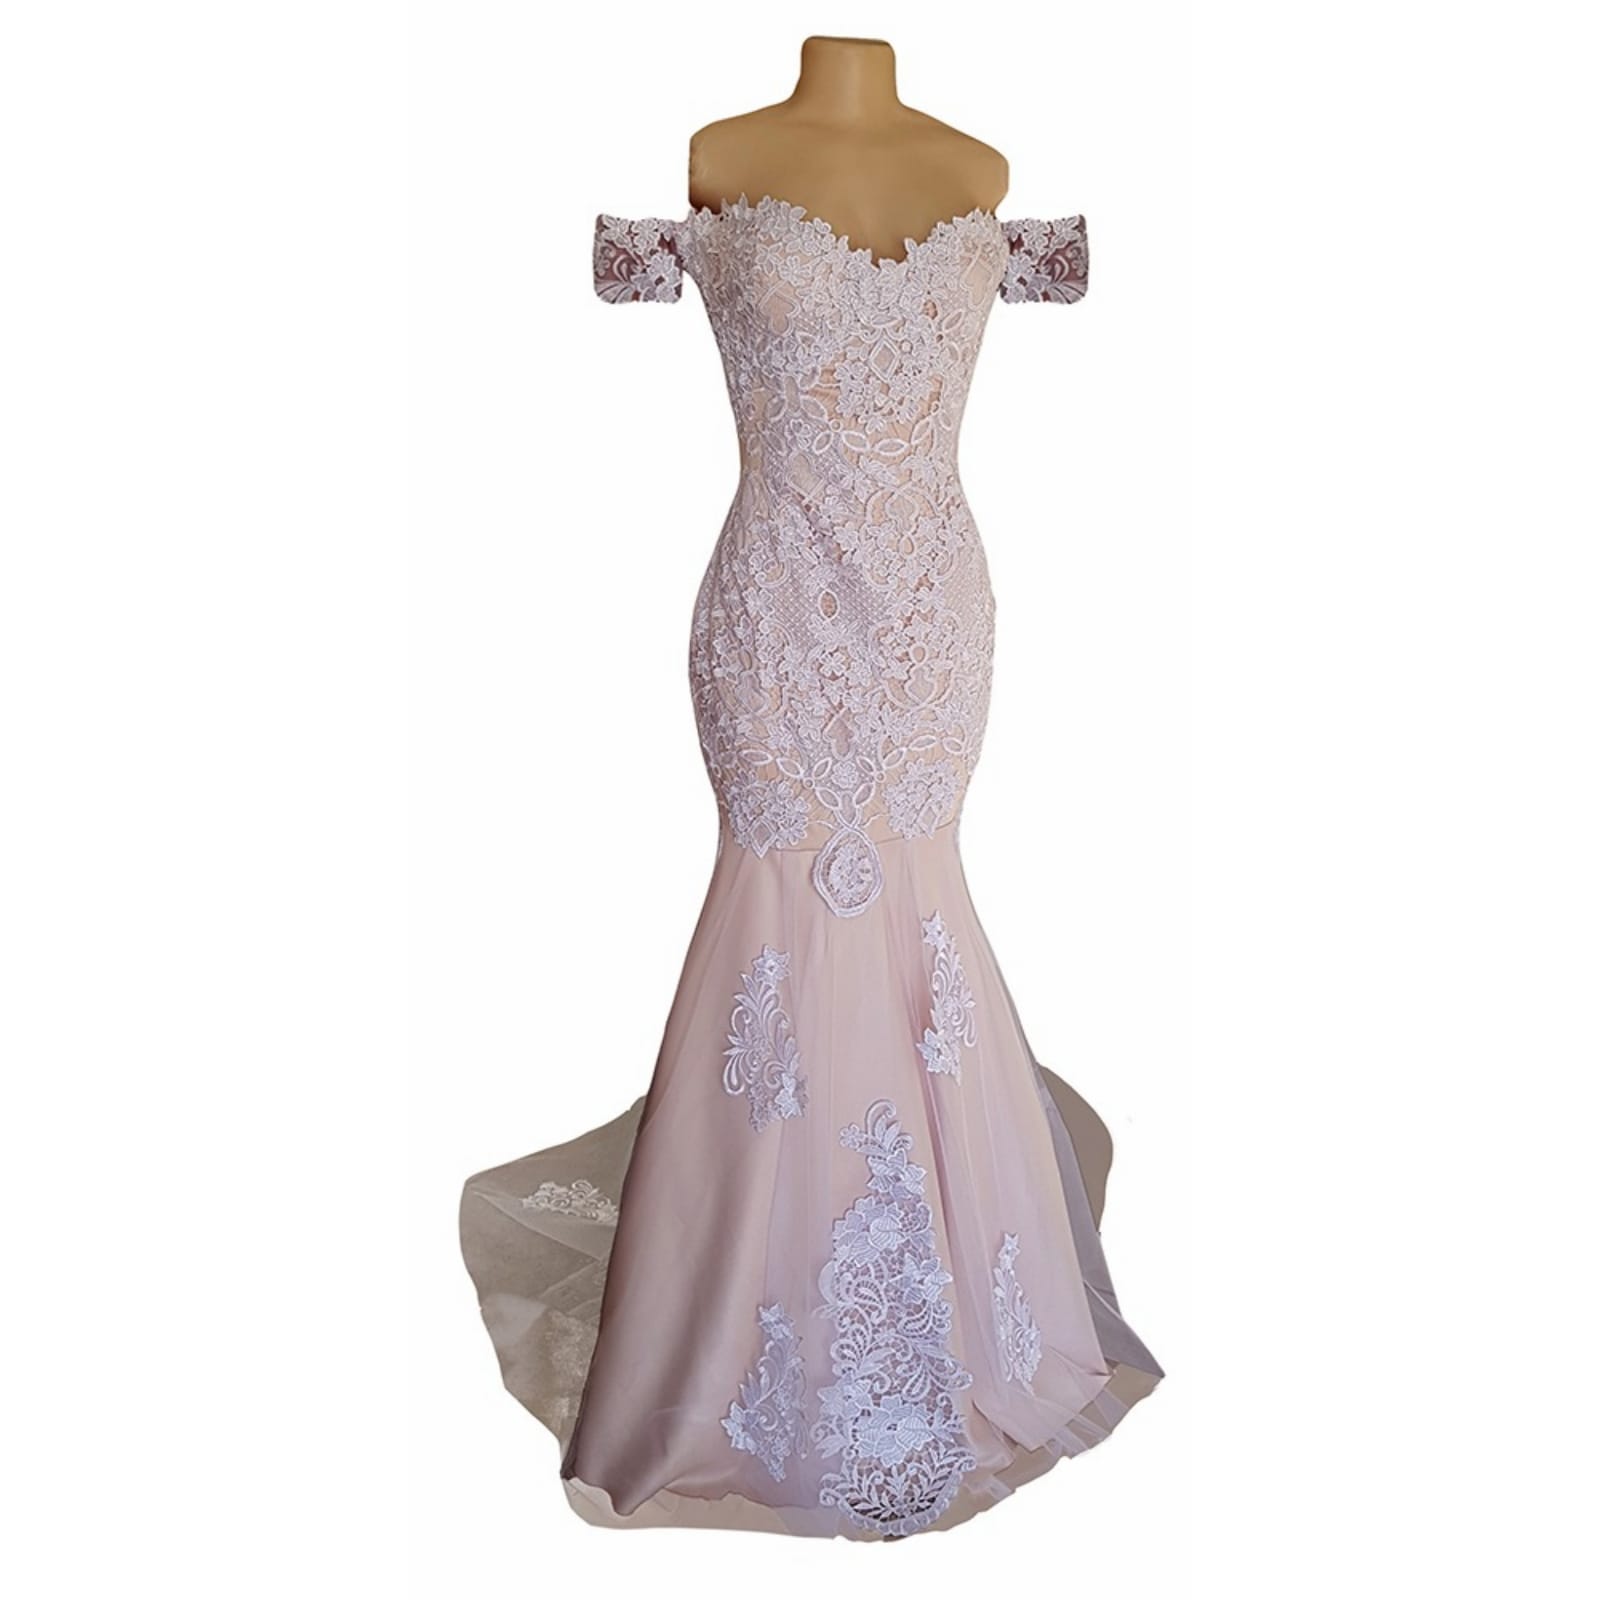 White lace and pinky peach mermaid wedding dress 4 pale peach and white soft mermaid wedding dress with a lace-up open back and off-shoulder strap sleeve. With a sheer train detailed with lace.